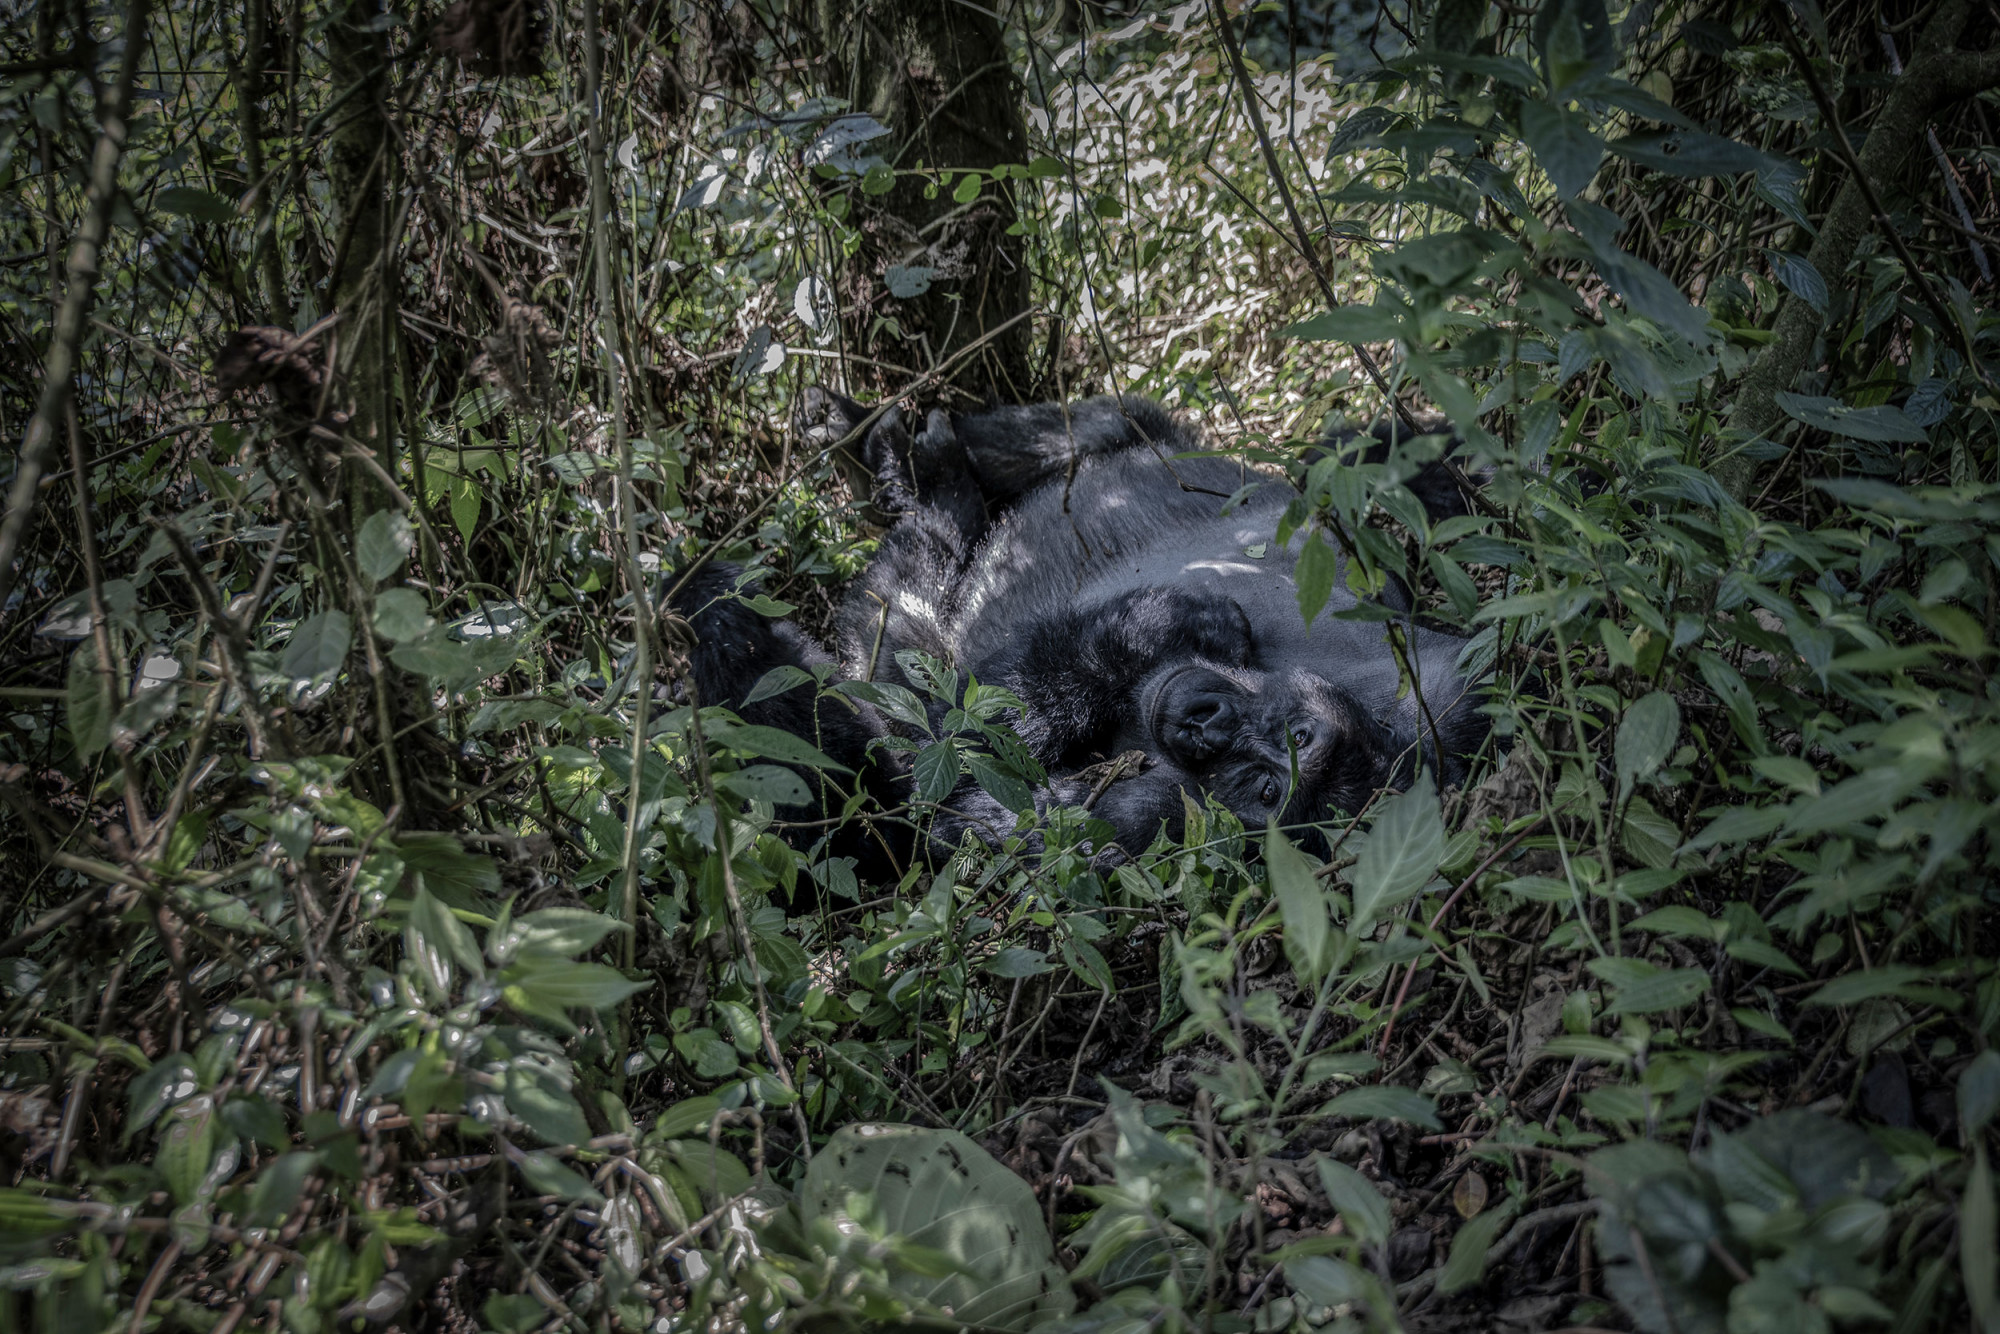 Kahuzi-Biega National Park, South-Kivu Province, September 05, 2021. Bonane, 250kg, one of the 14 gorilla family leaders followed by ecoguards and accustomed to human presence, resting in the forest. © Guerchom Ndebo for Fondation Carmignac